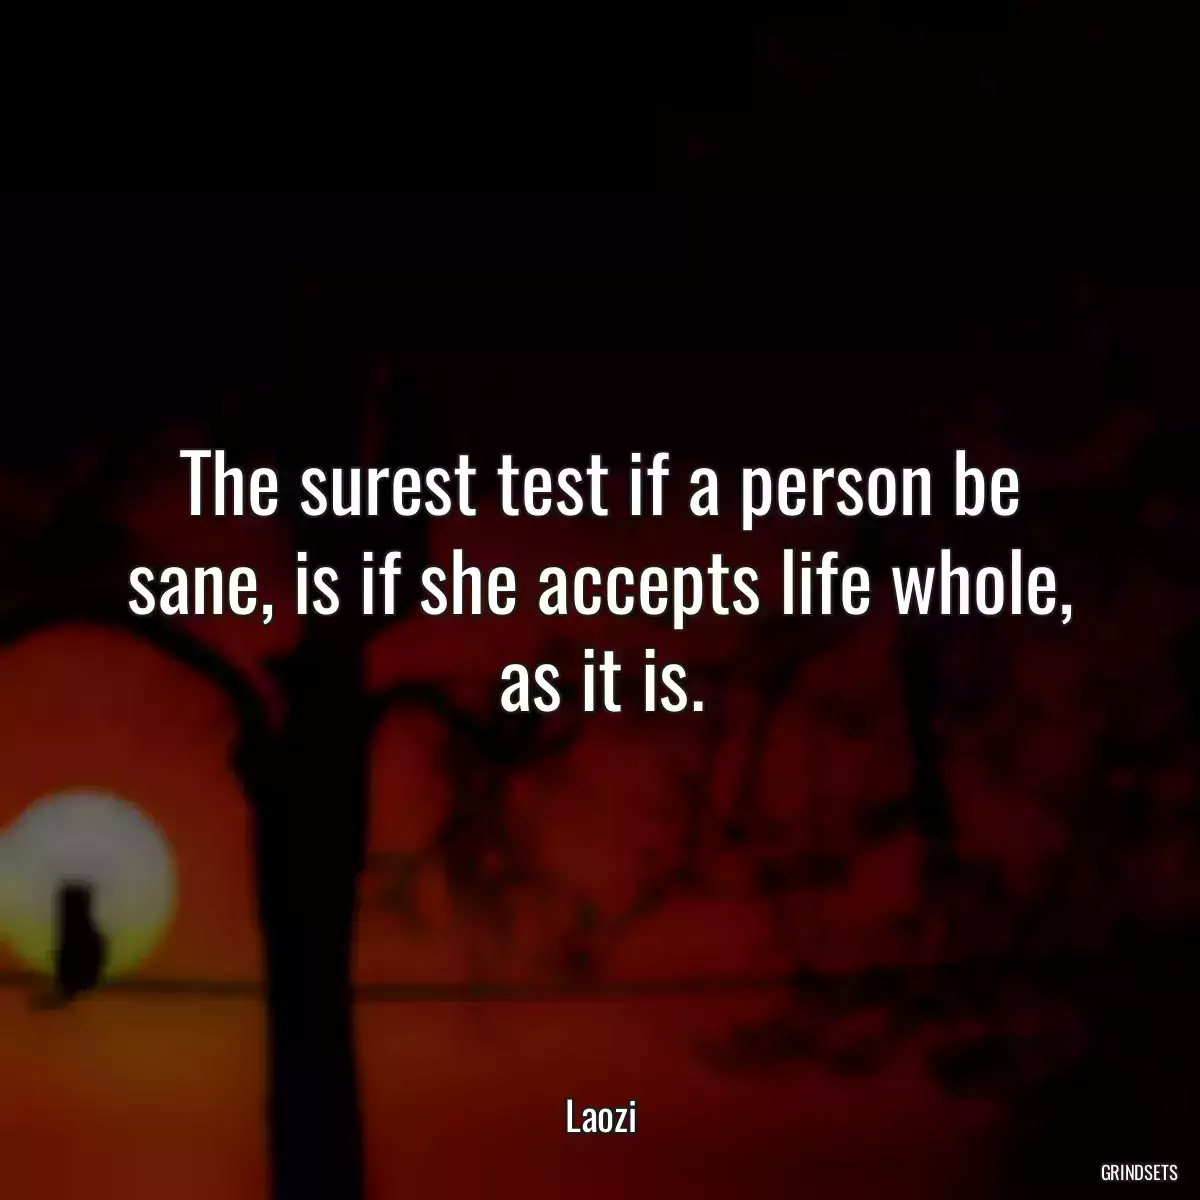 The surest test if a person be sane, is if she accepts life whole, as it is.